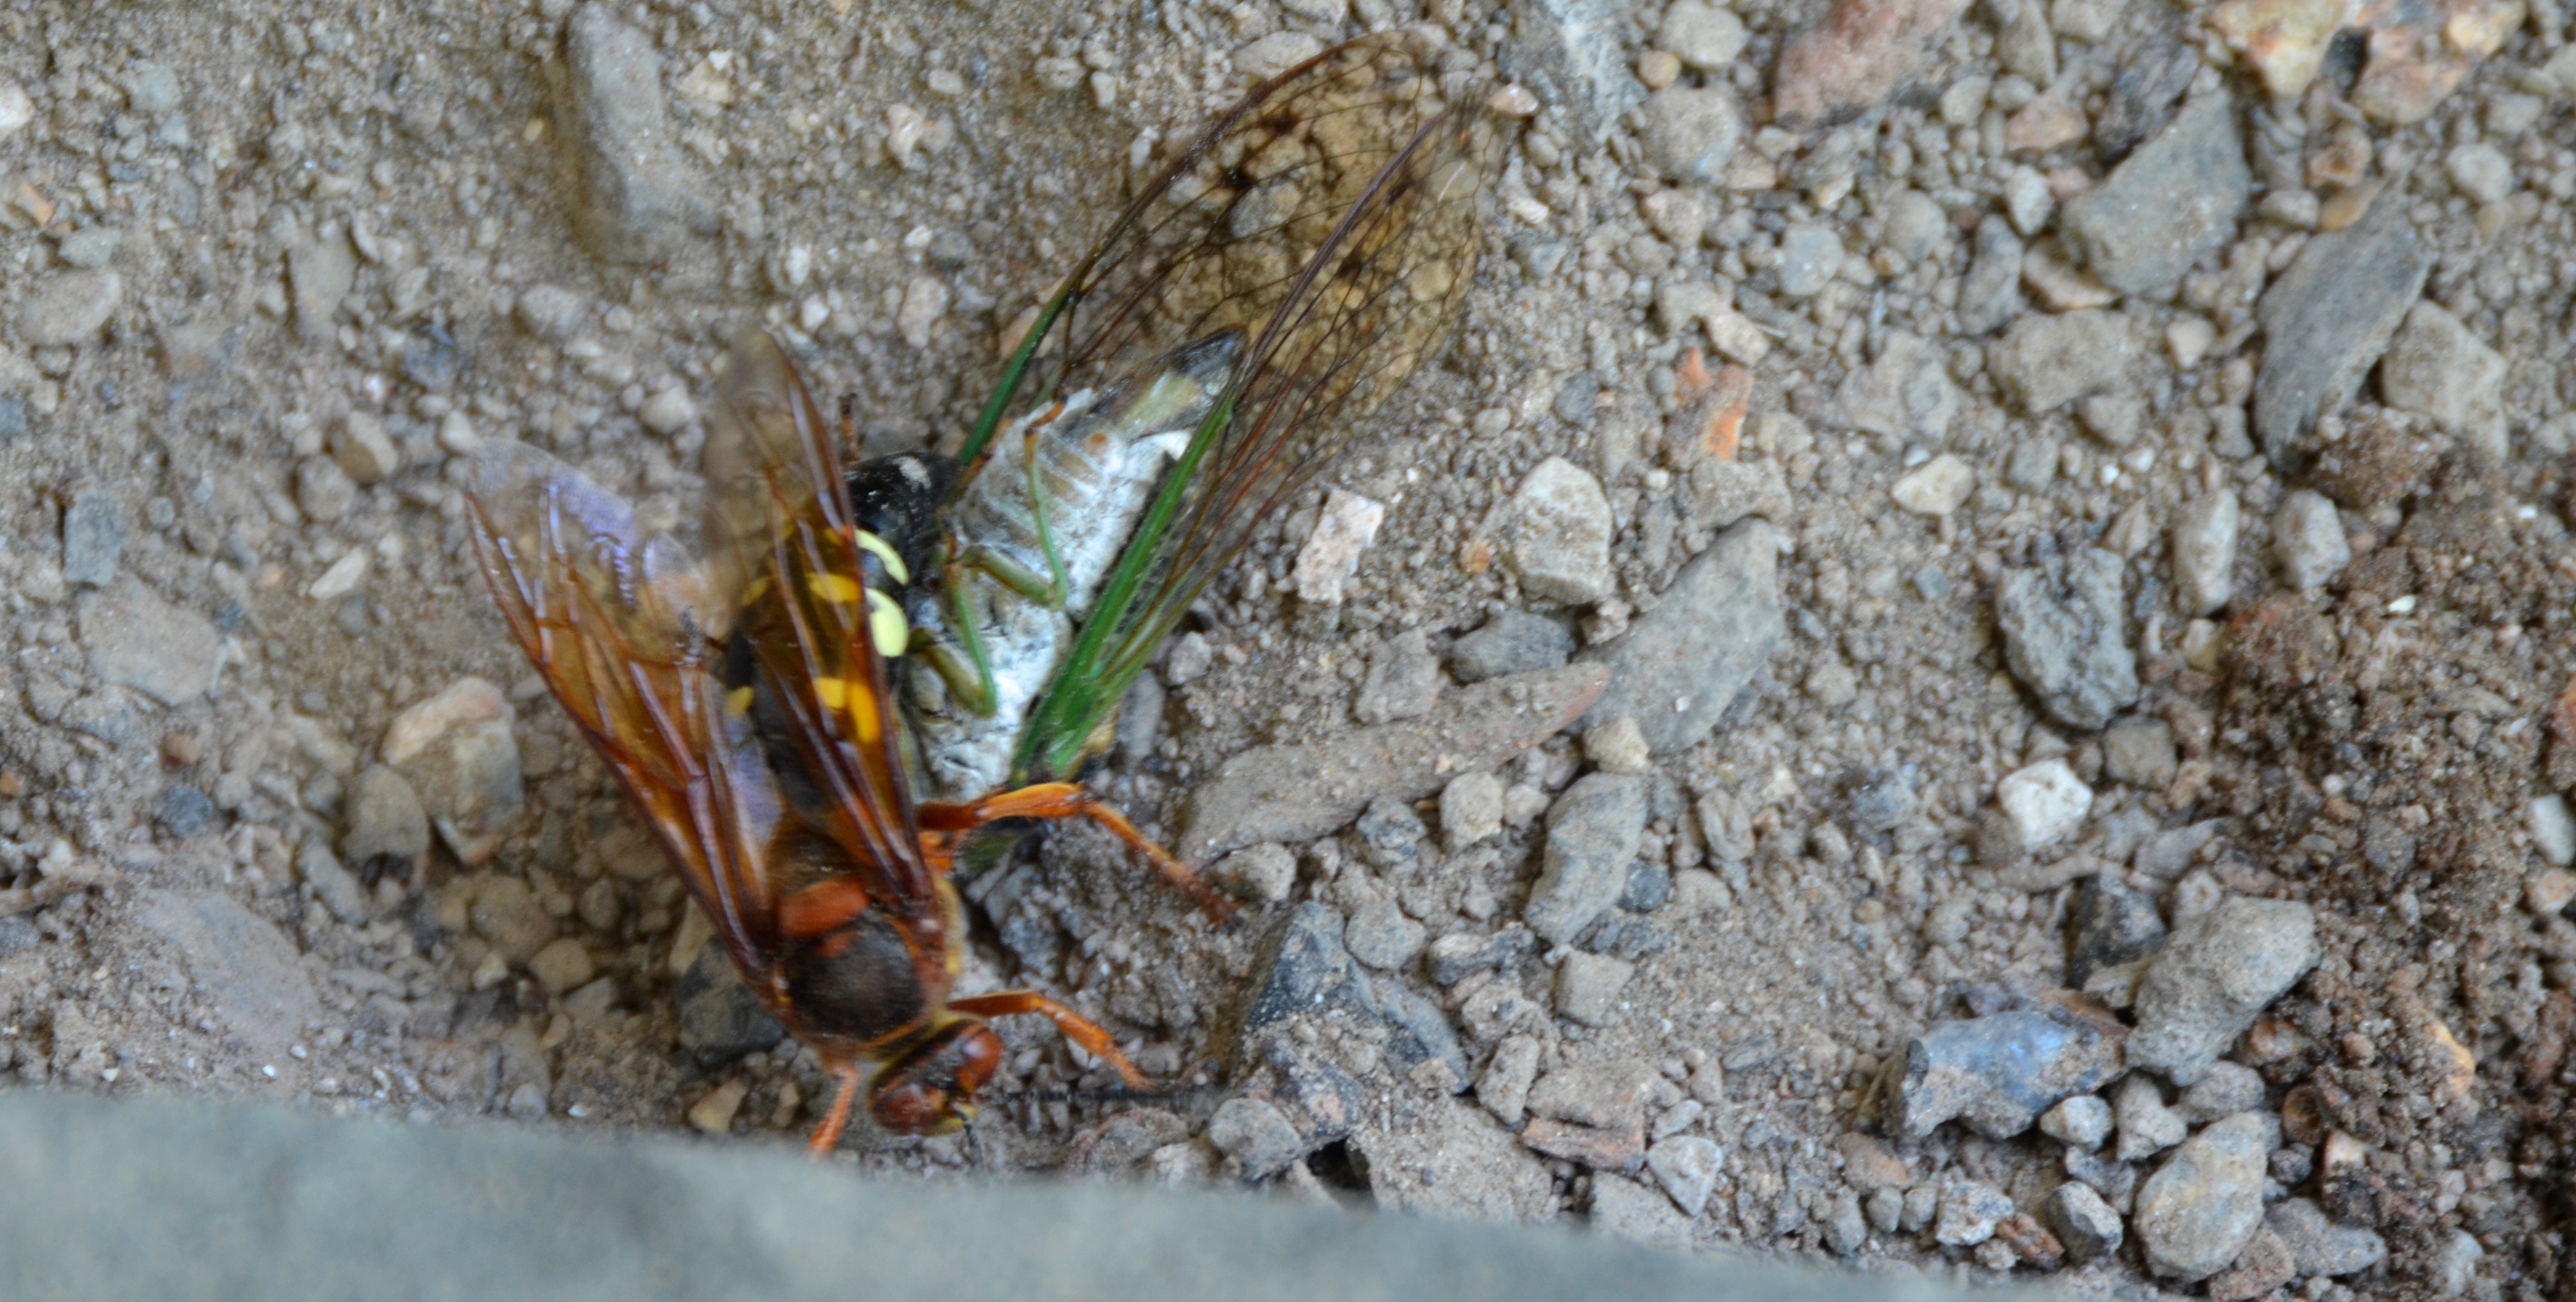 Turing the Cicada around to go into the burrow head first